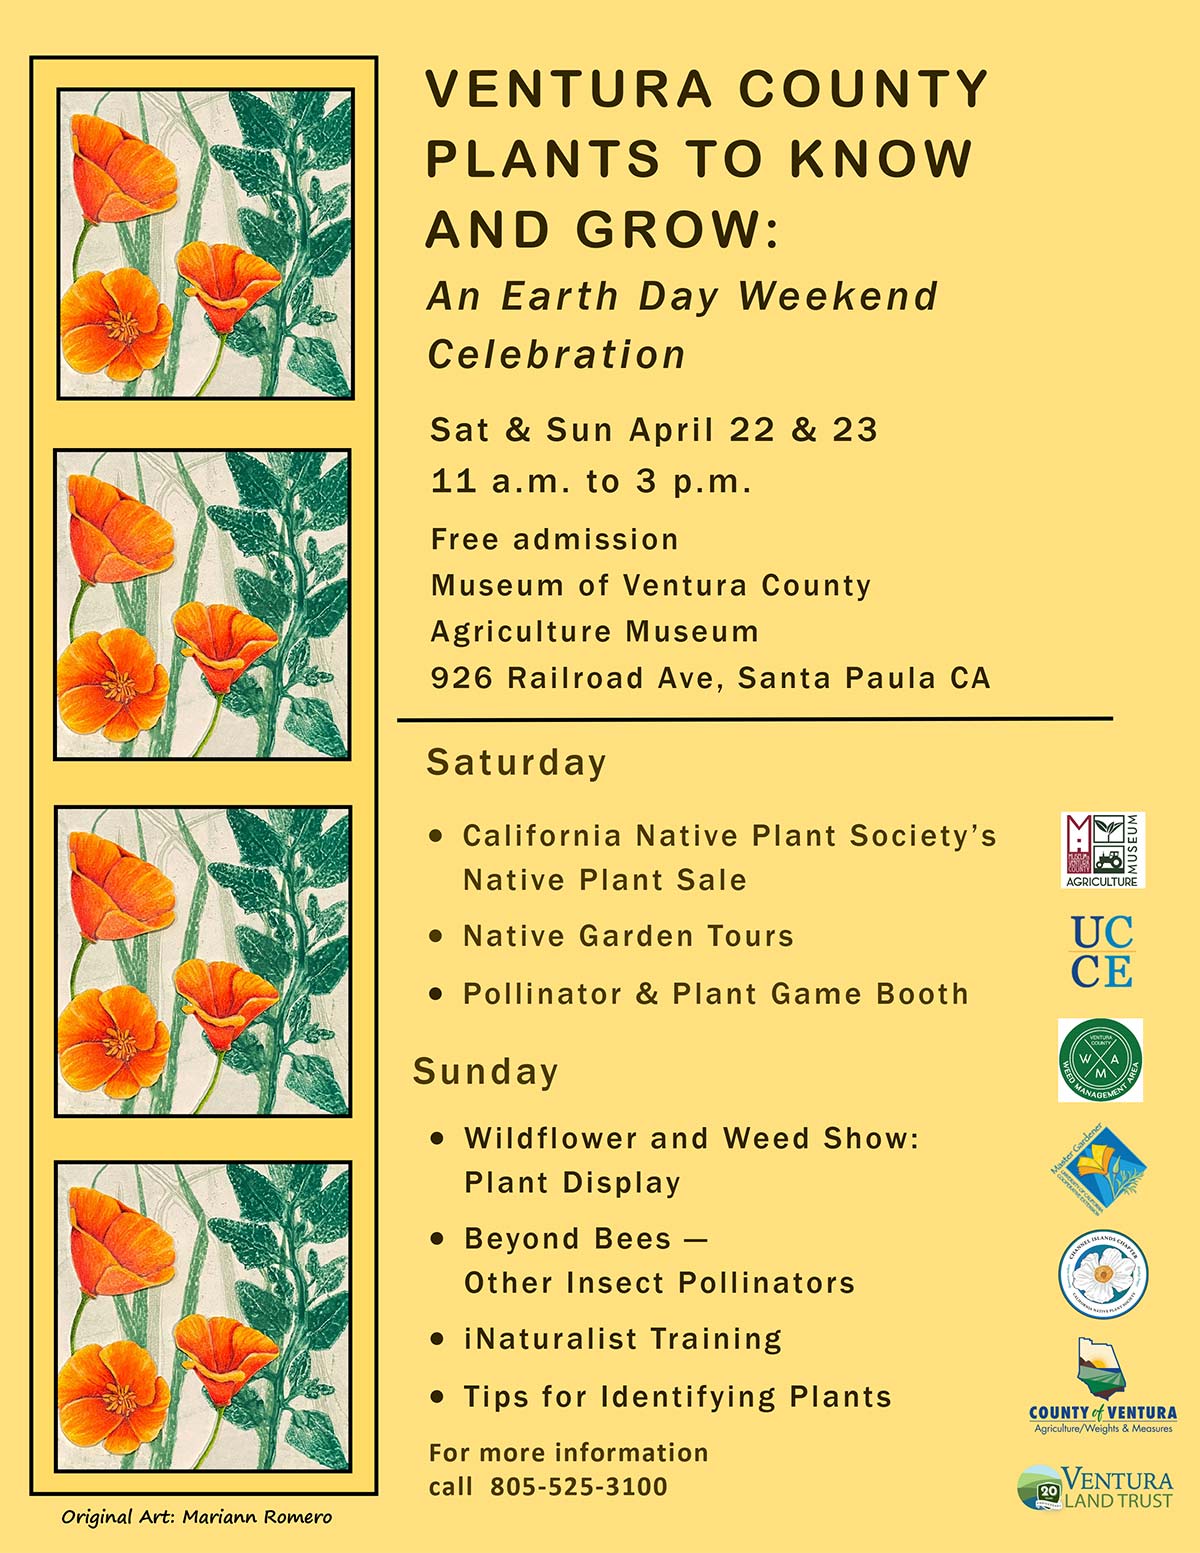 Ventura County Plants to Know and Grow Event Flyer